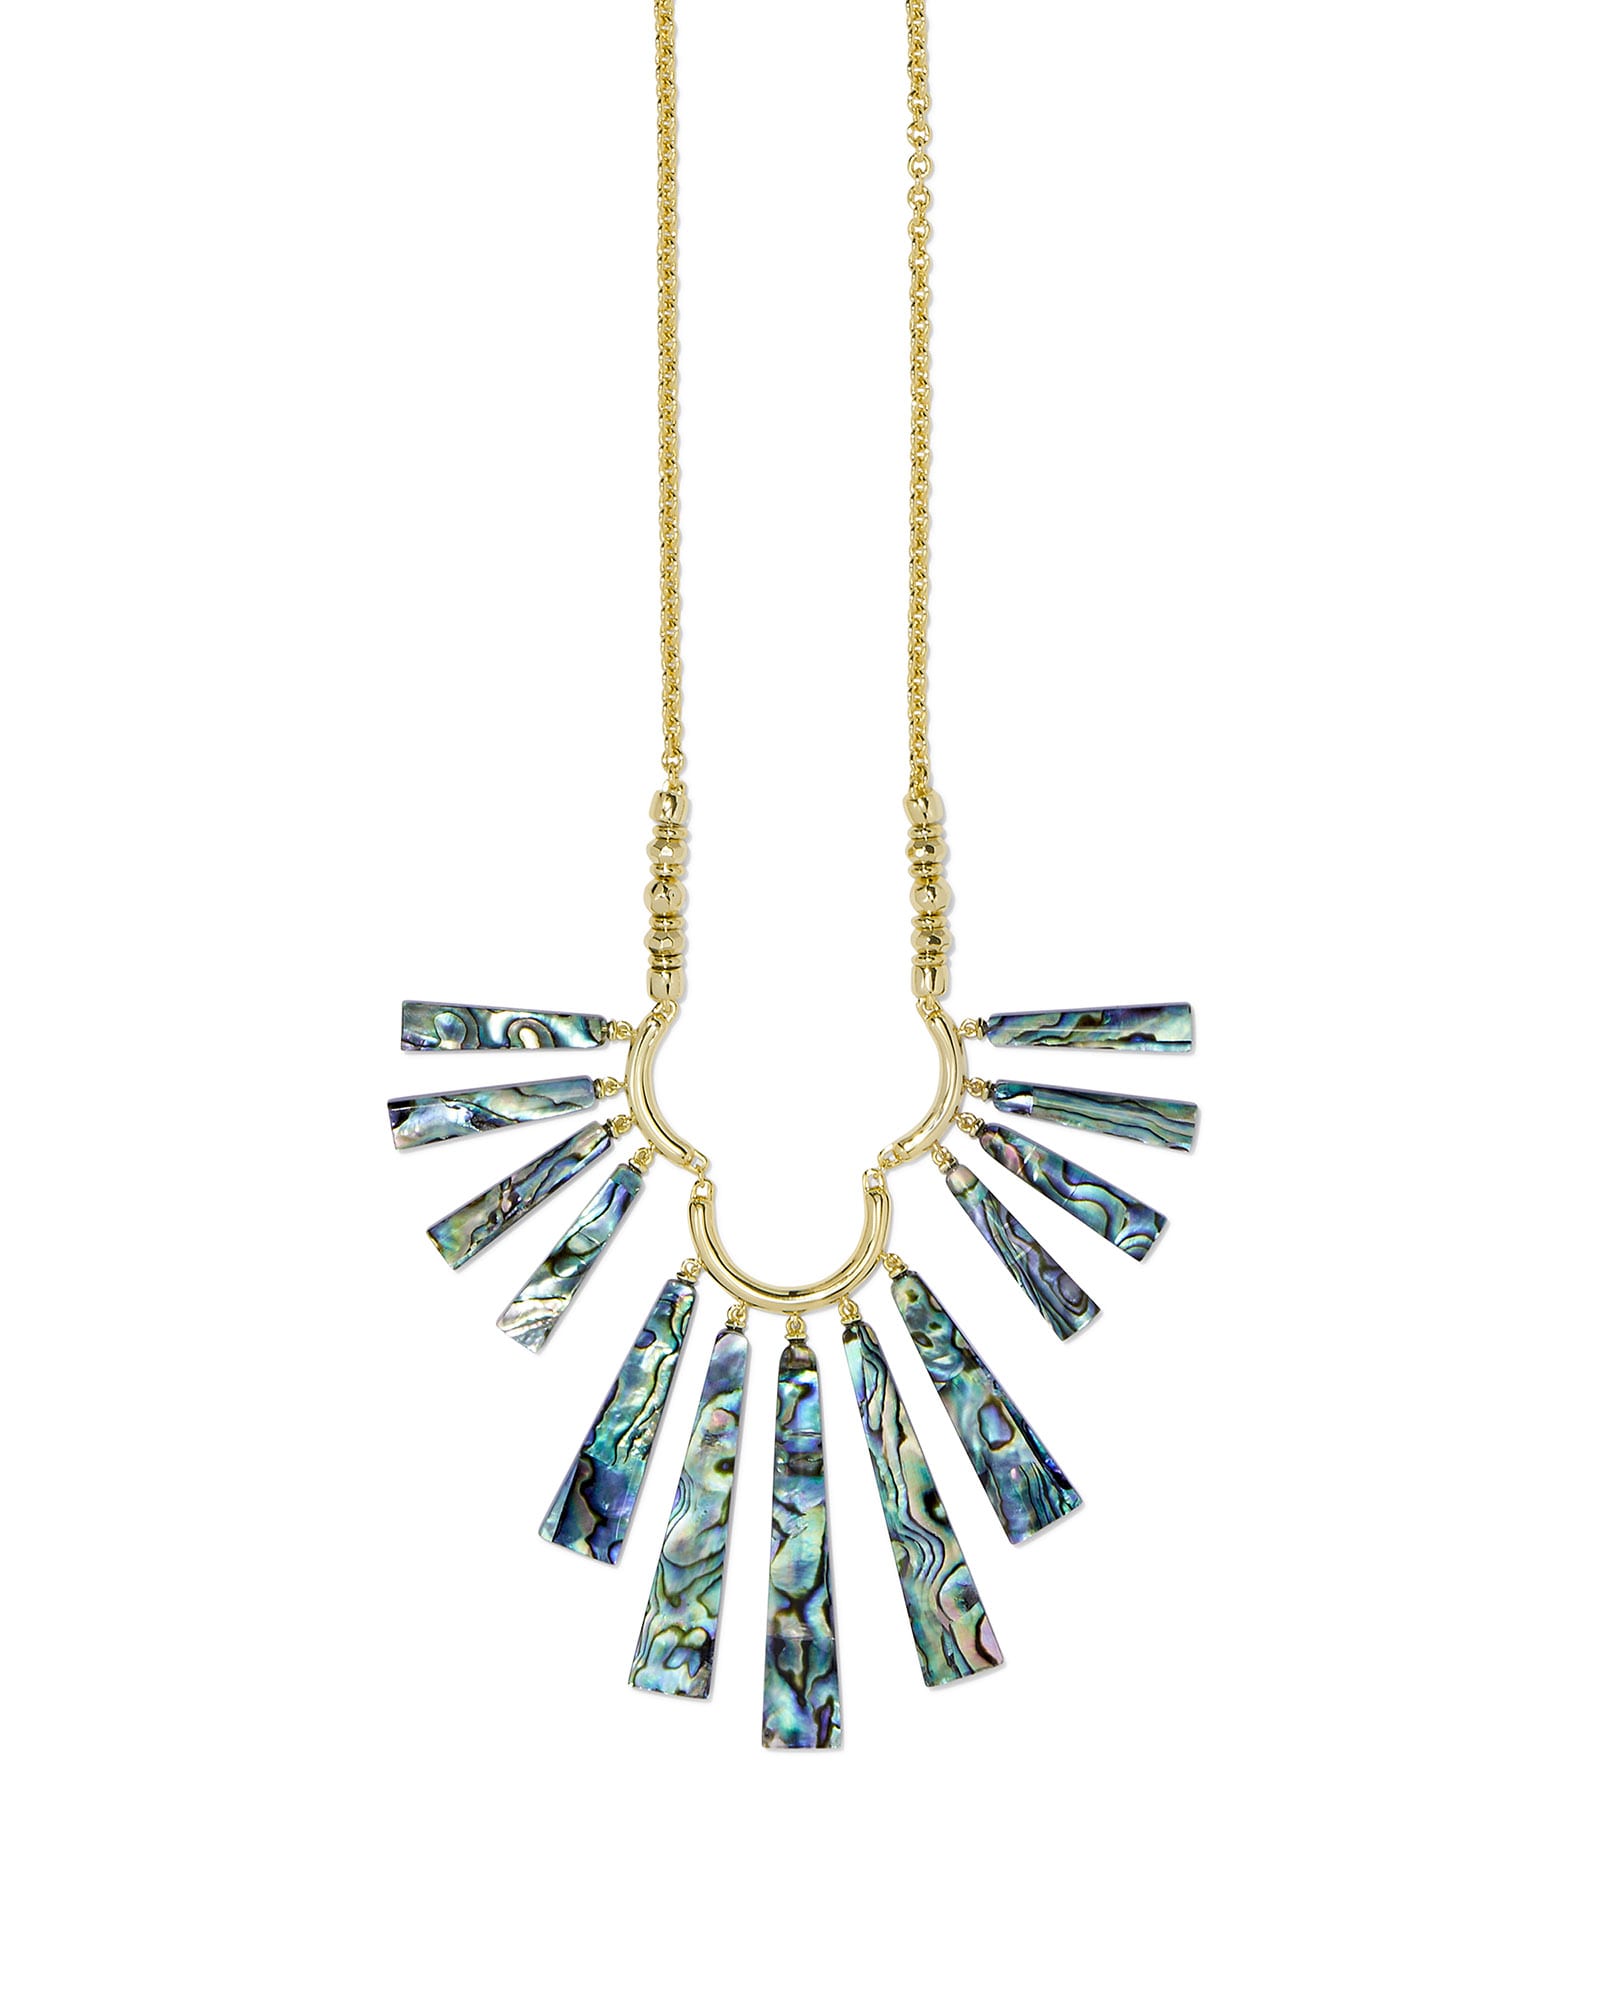 Layton Gold Long Statement Necklace in Abalone Shell